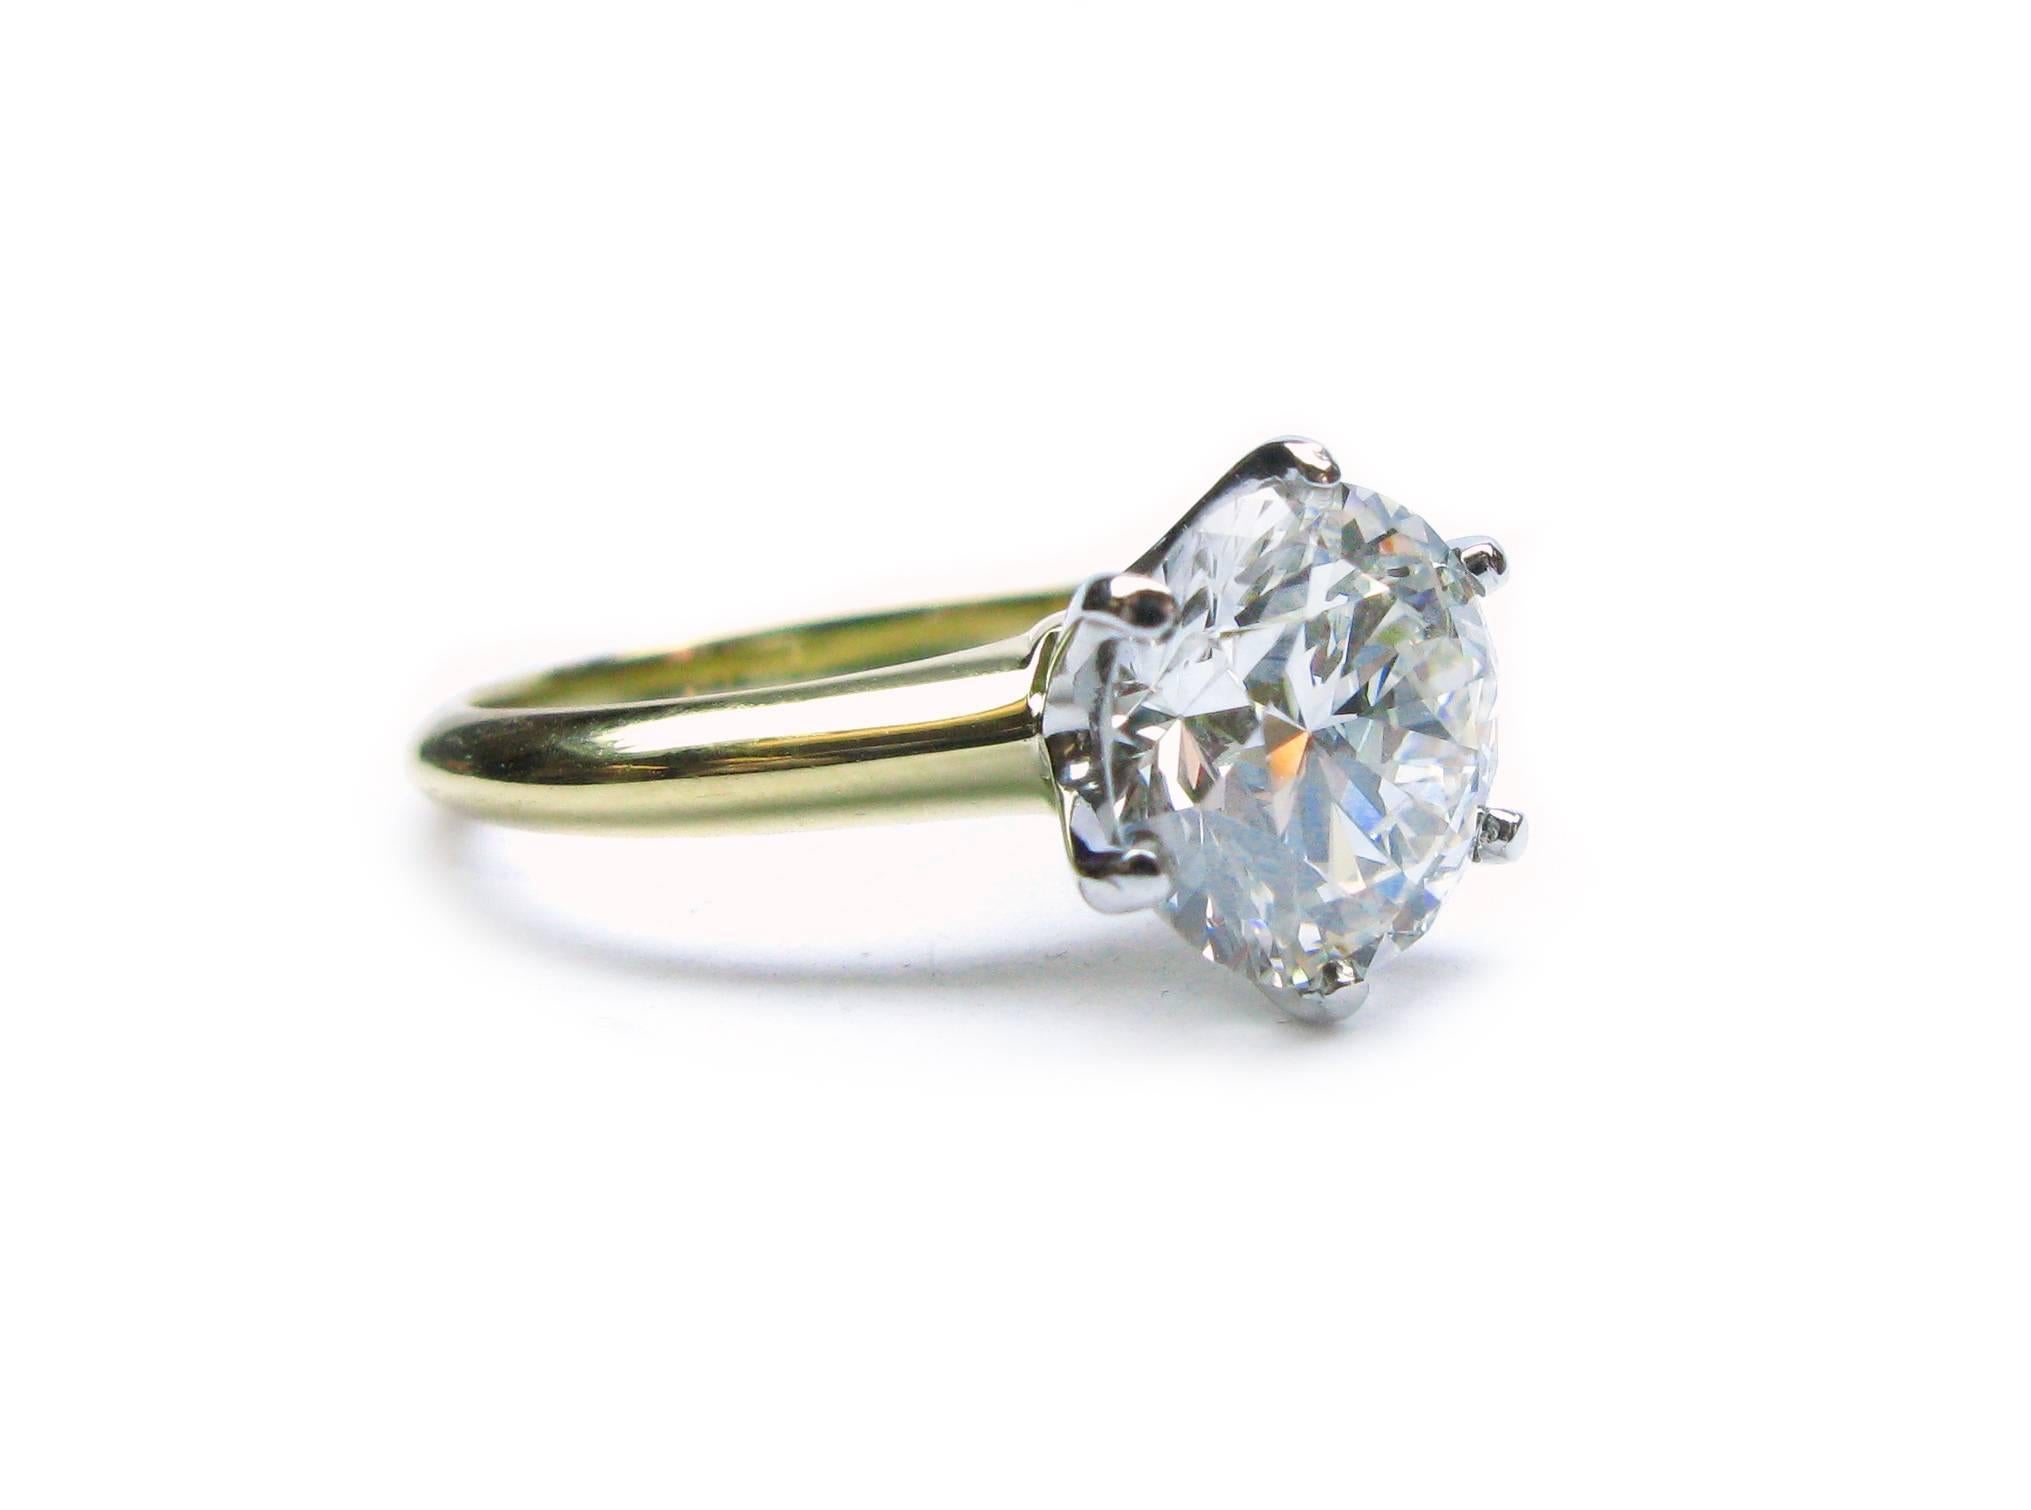 This stunning platinum and 18kt yellow gold Tiffany & Co. signed solitaire ring features a GIA certified 2.25ct, H color, VS1 clarity, Round Brilliant diamond set into a 6-prong head. This classic beauty will be turning heads in every direction!